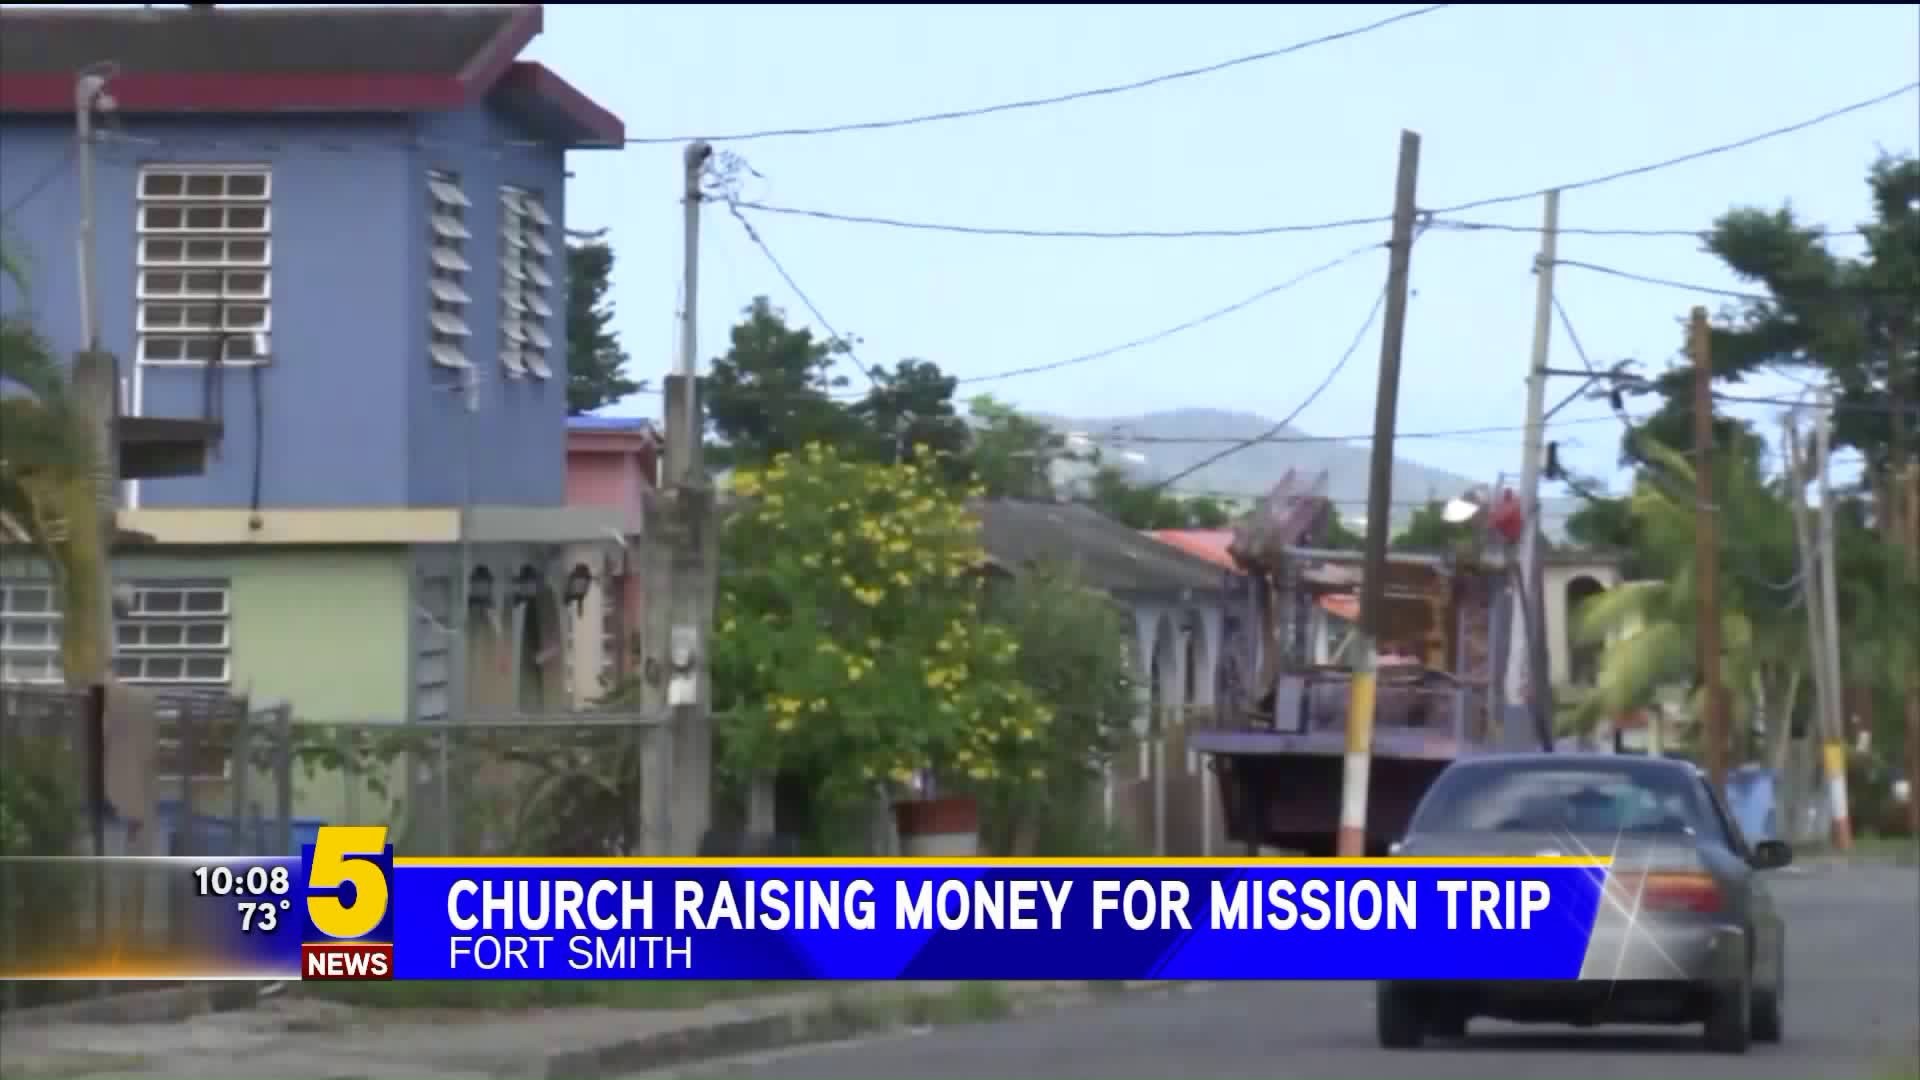 Fort Smith Church Raising Money for Mission Trip